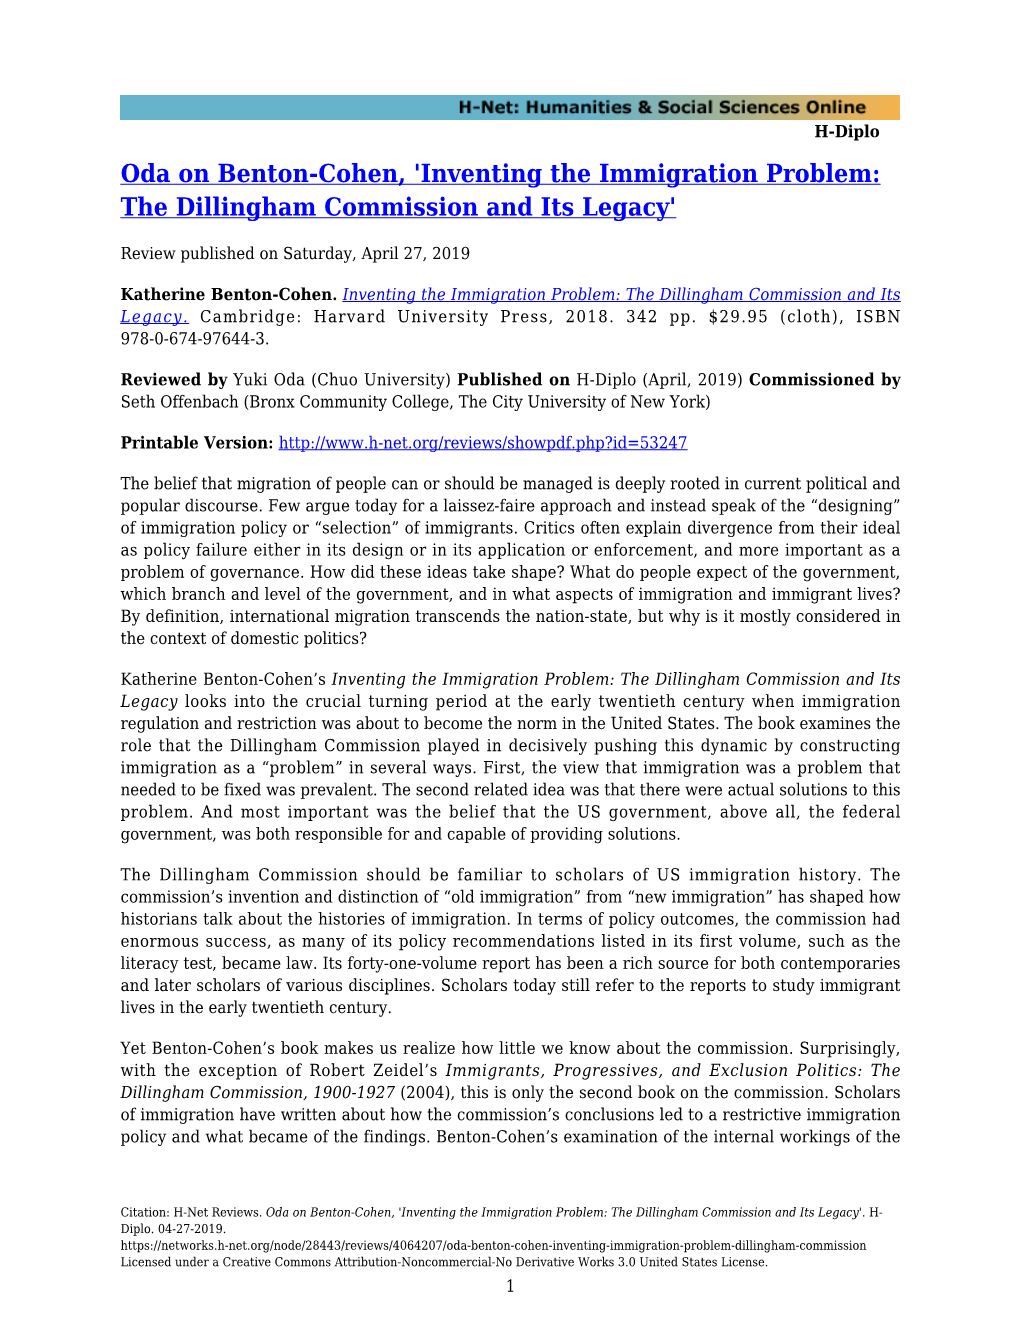 Oda on Benton-Cohen, 'Inventing the Immigration Problem: the Dillingham Commission and Its Legacy'